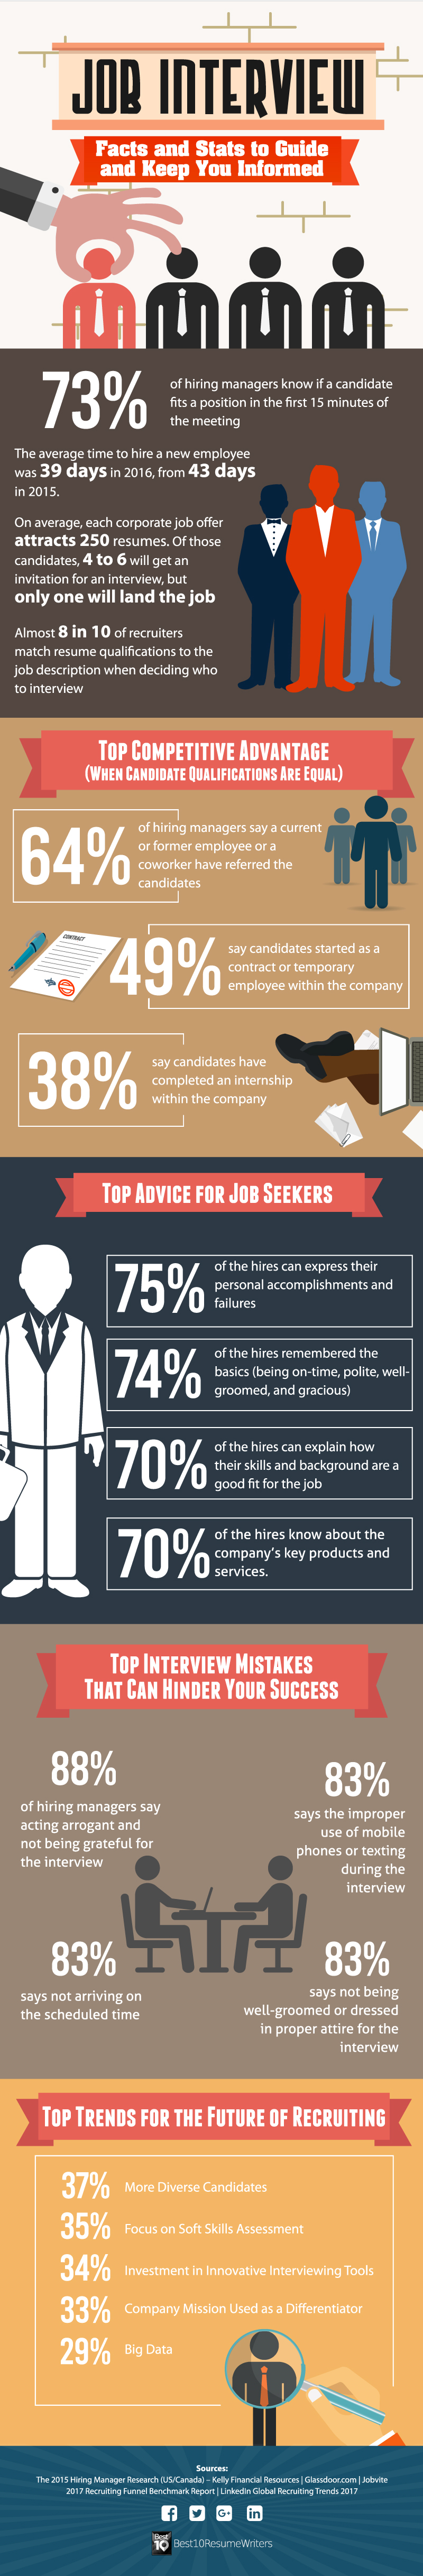 Job Interview Facts and Stats - Best10ResumeWriters